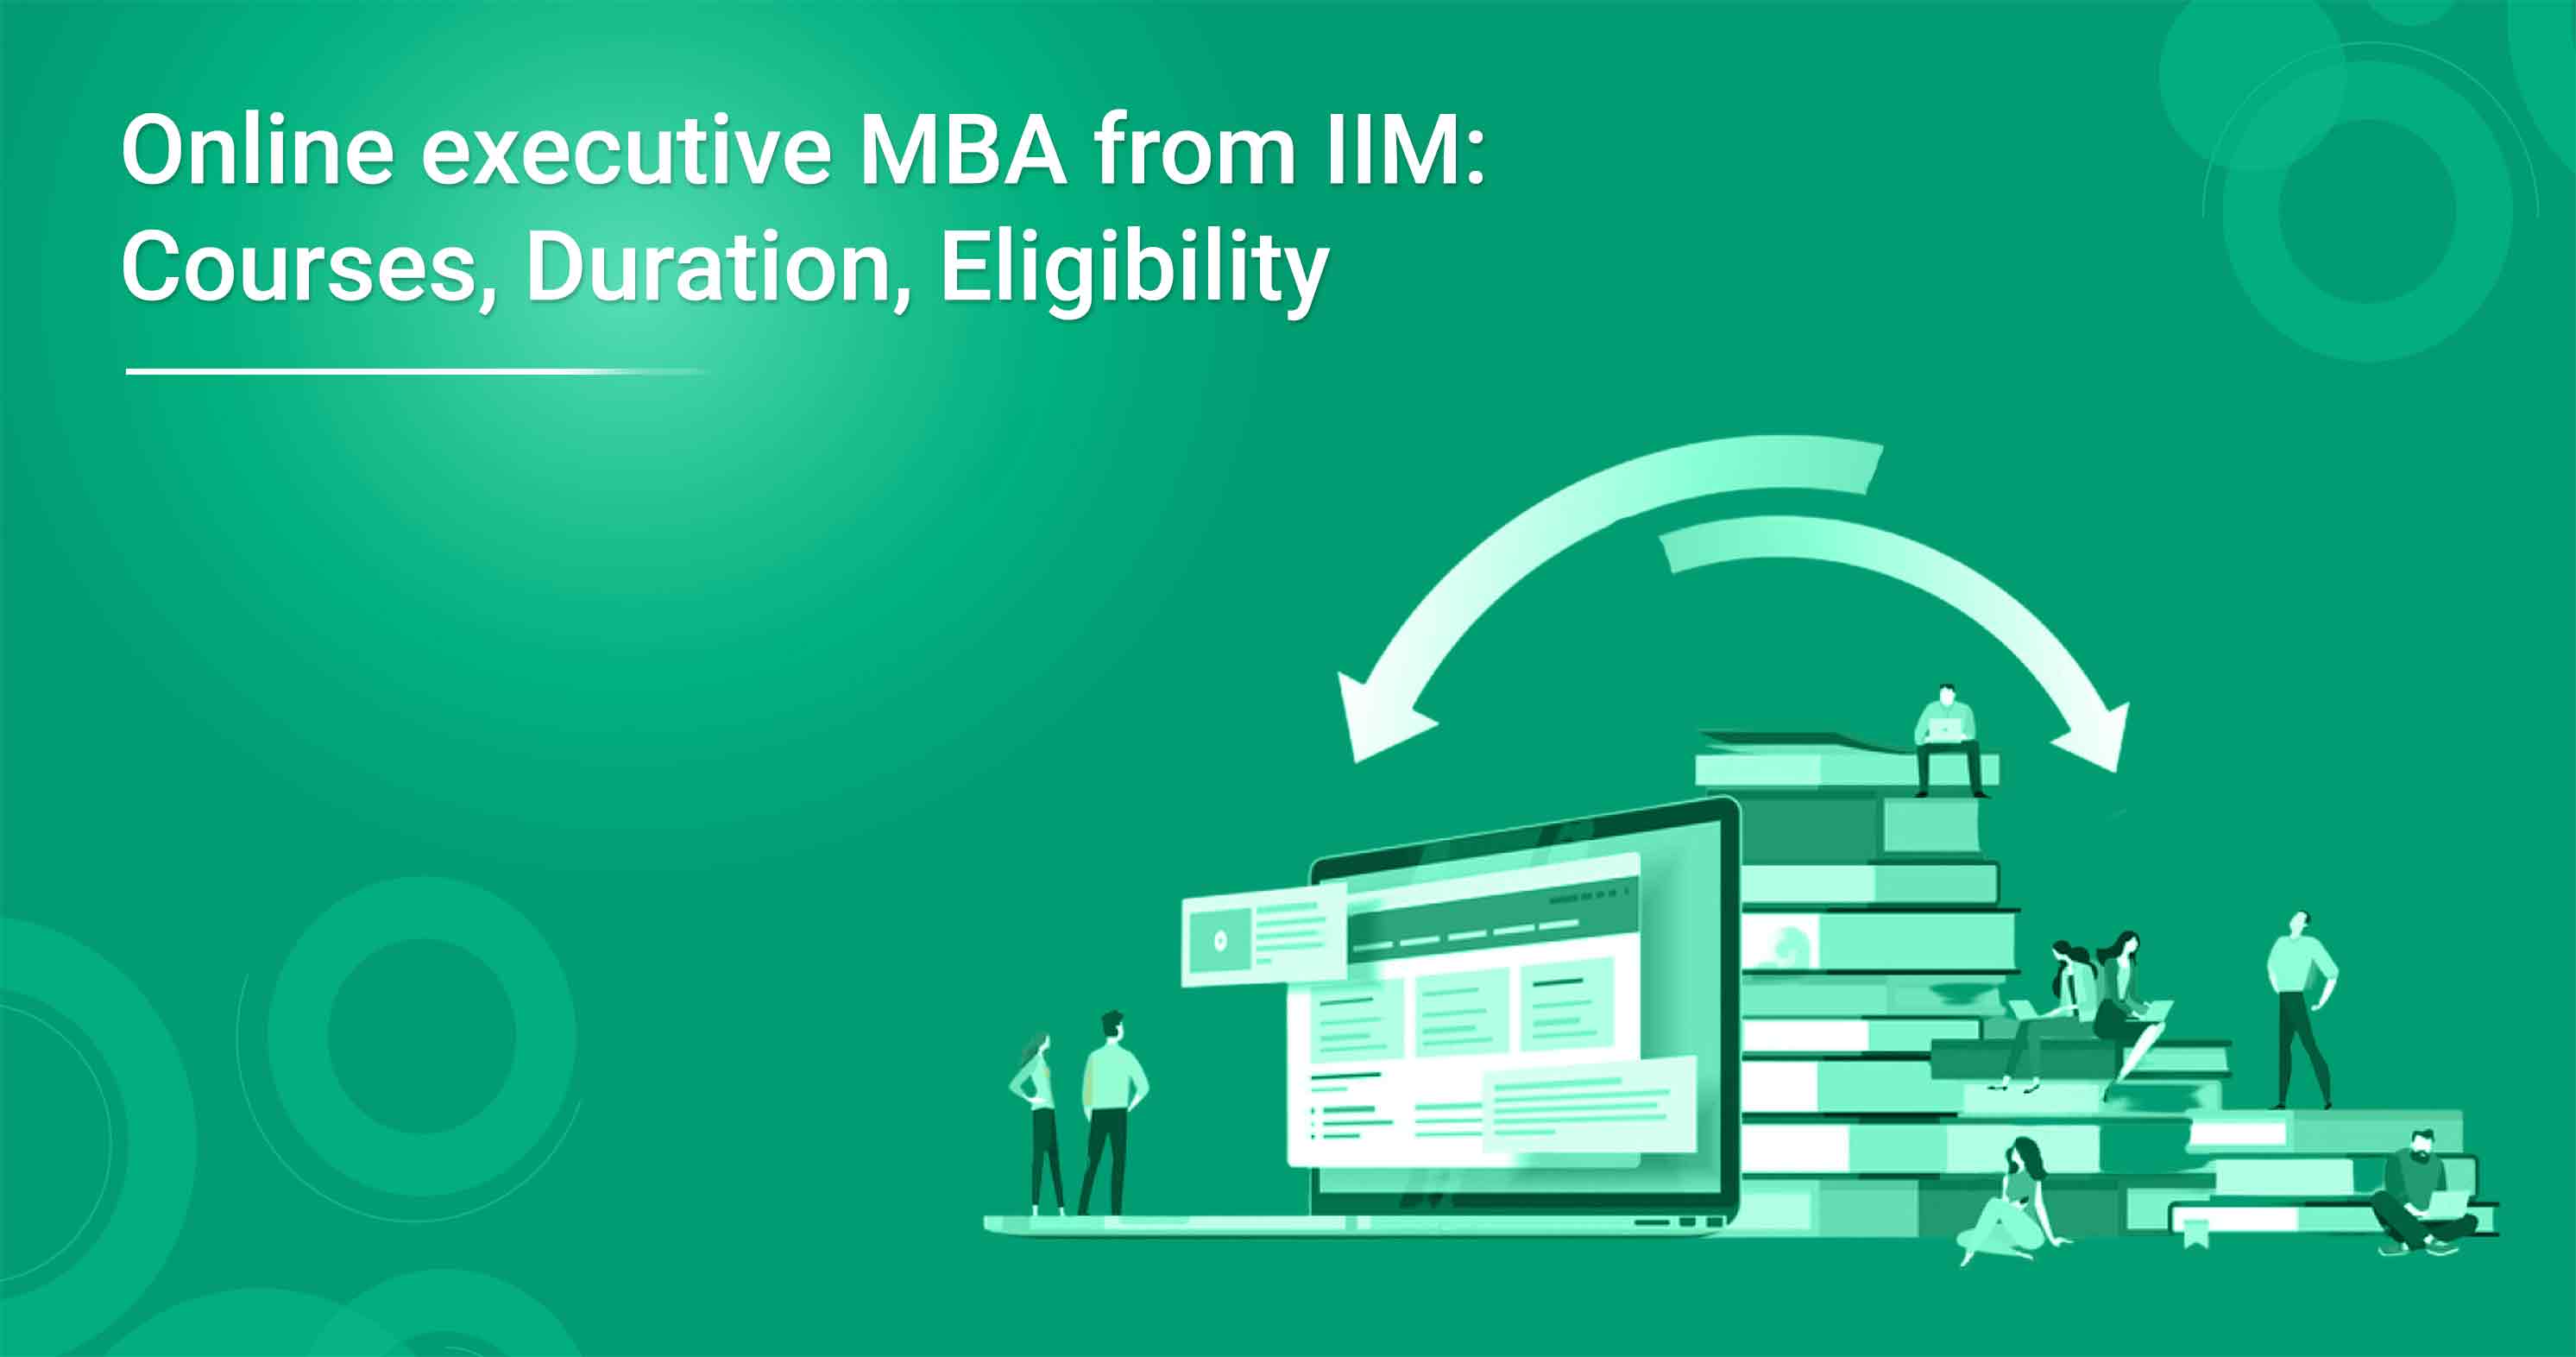 Online executive MBA from IIM: Courses, Duration, Eligibility